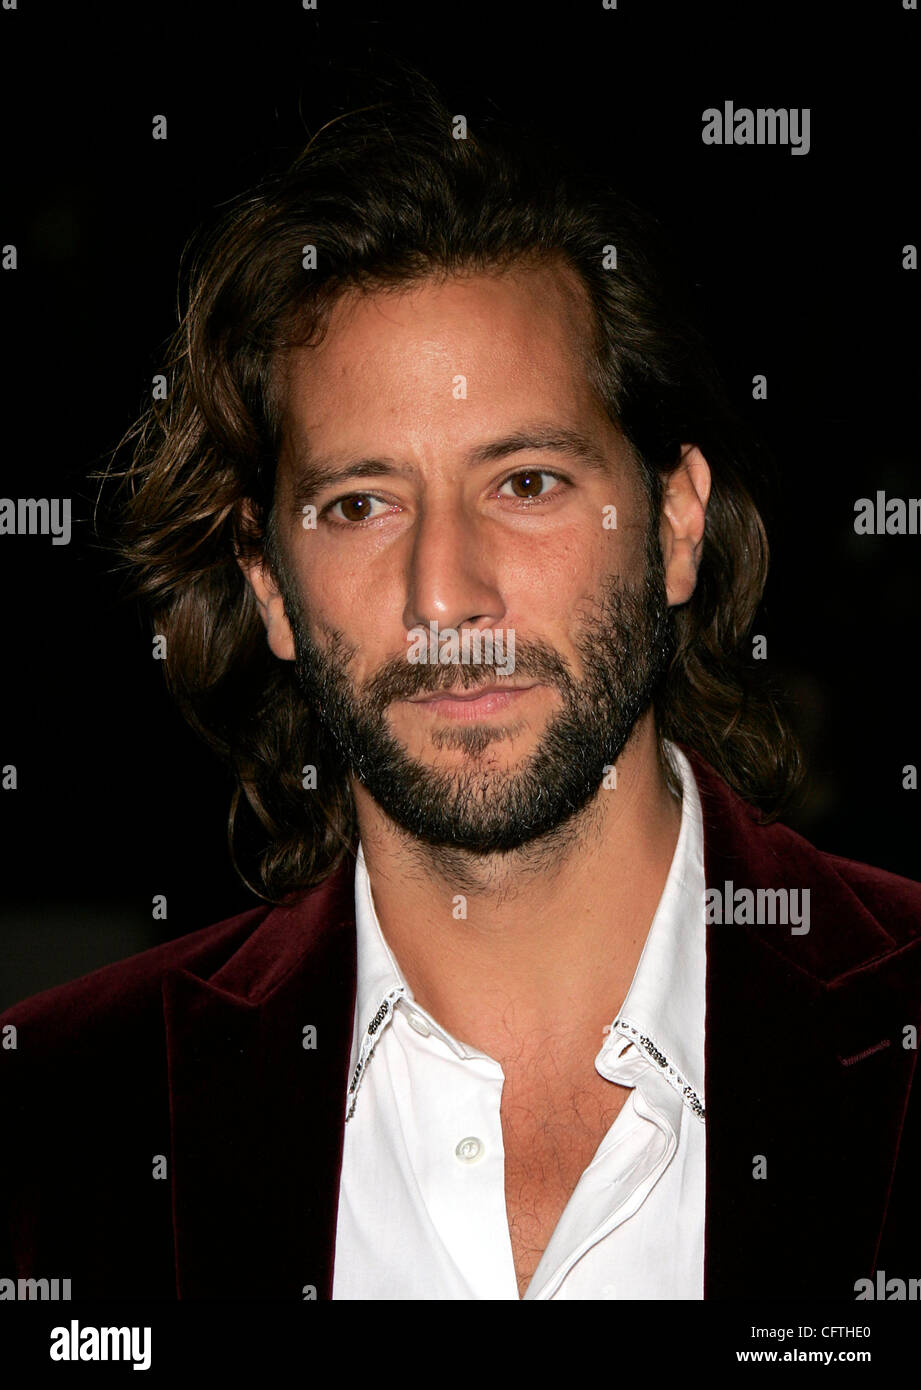 Jan 13, 2007; North Hollywood, California, USA; Actor HENRY IAN CUSICK at An Evening With 'LOST' held at the Academy of Television 's Leonard Goldenson Theatre. Mandatory Credit: Photo by Lisa O'Connor/ZUMA Press. (©) Copyright 2007 by Lisa O'Connor Stock Photo